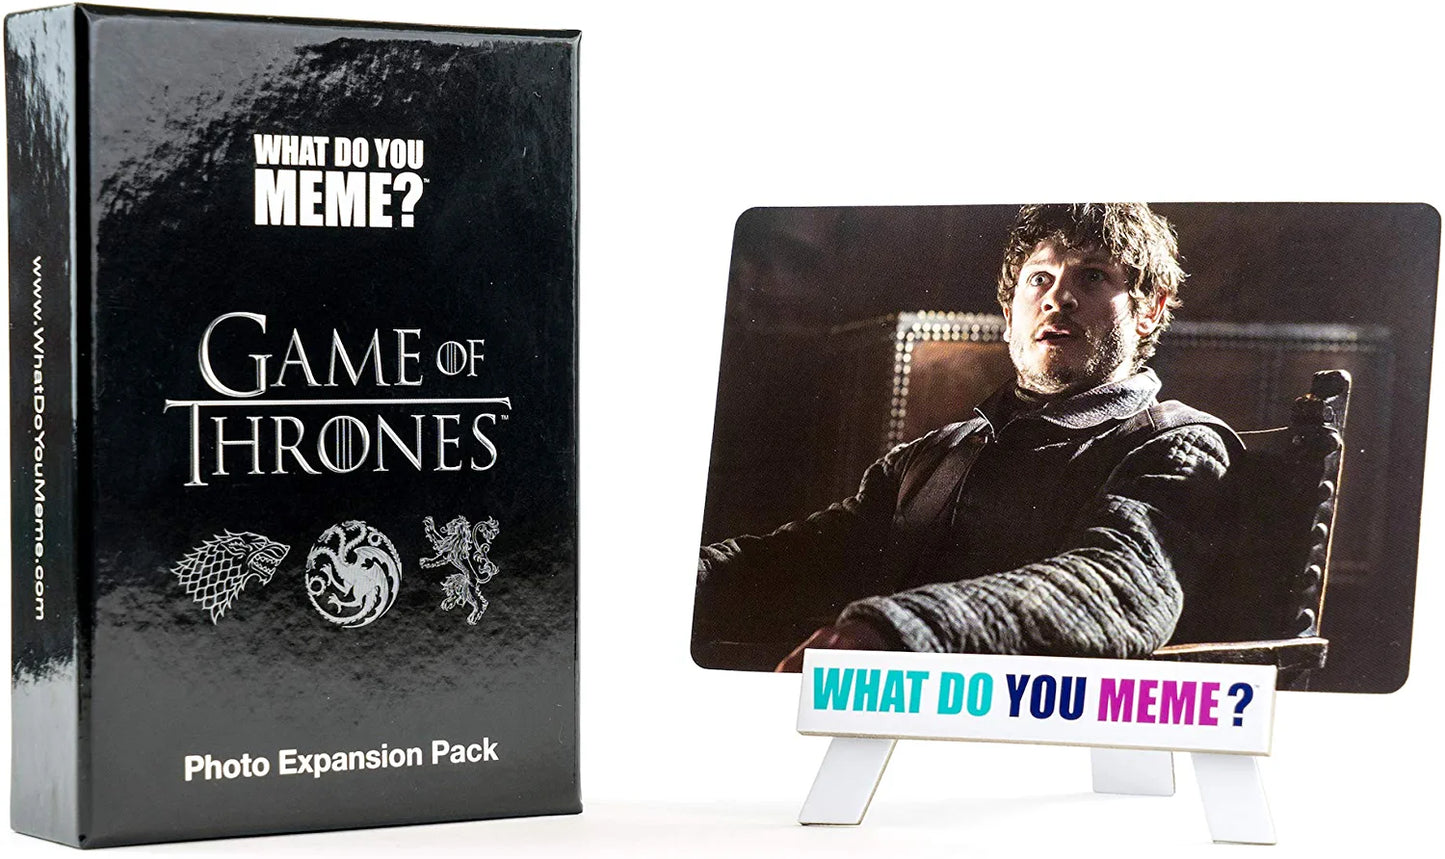 Game of Thrones Photo Expansion Pack by What Do You Meme?